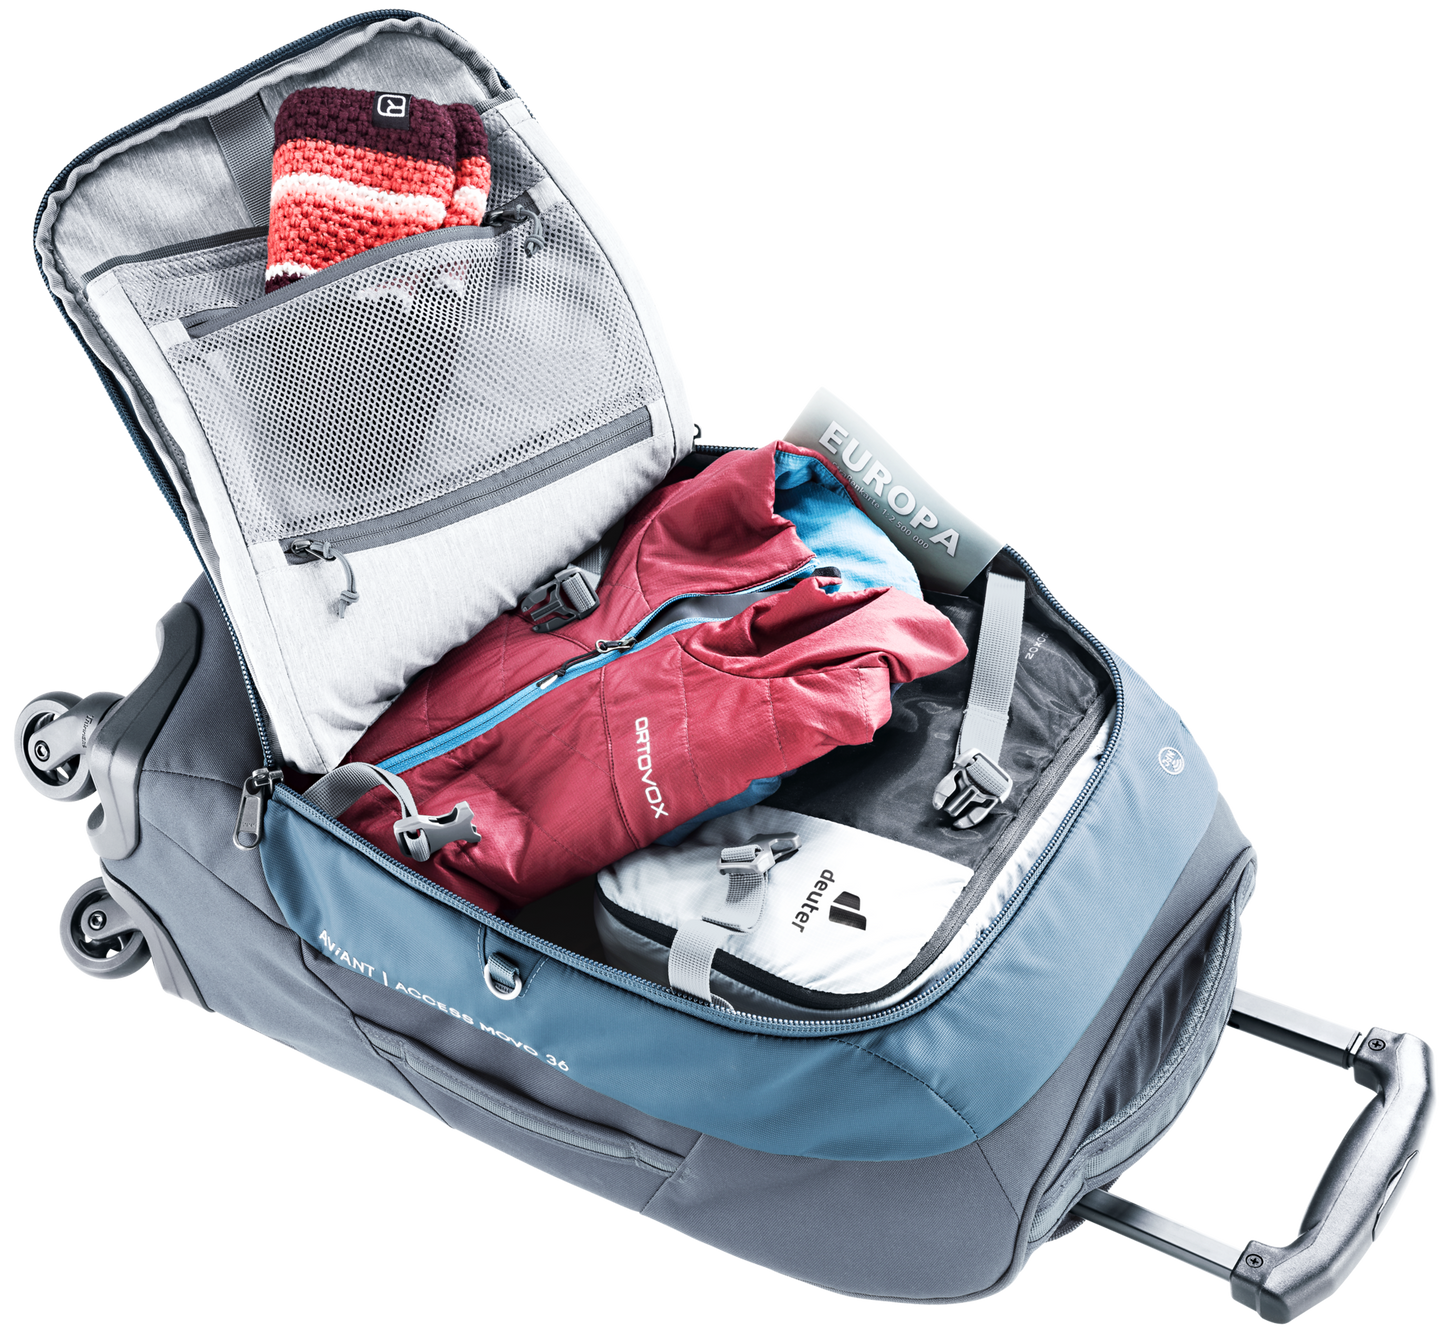 Deuter AViANT Access Movo Spinner Suitcases